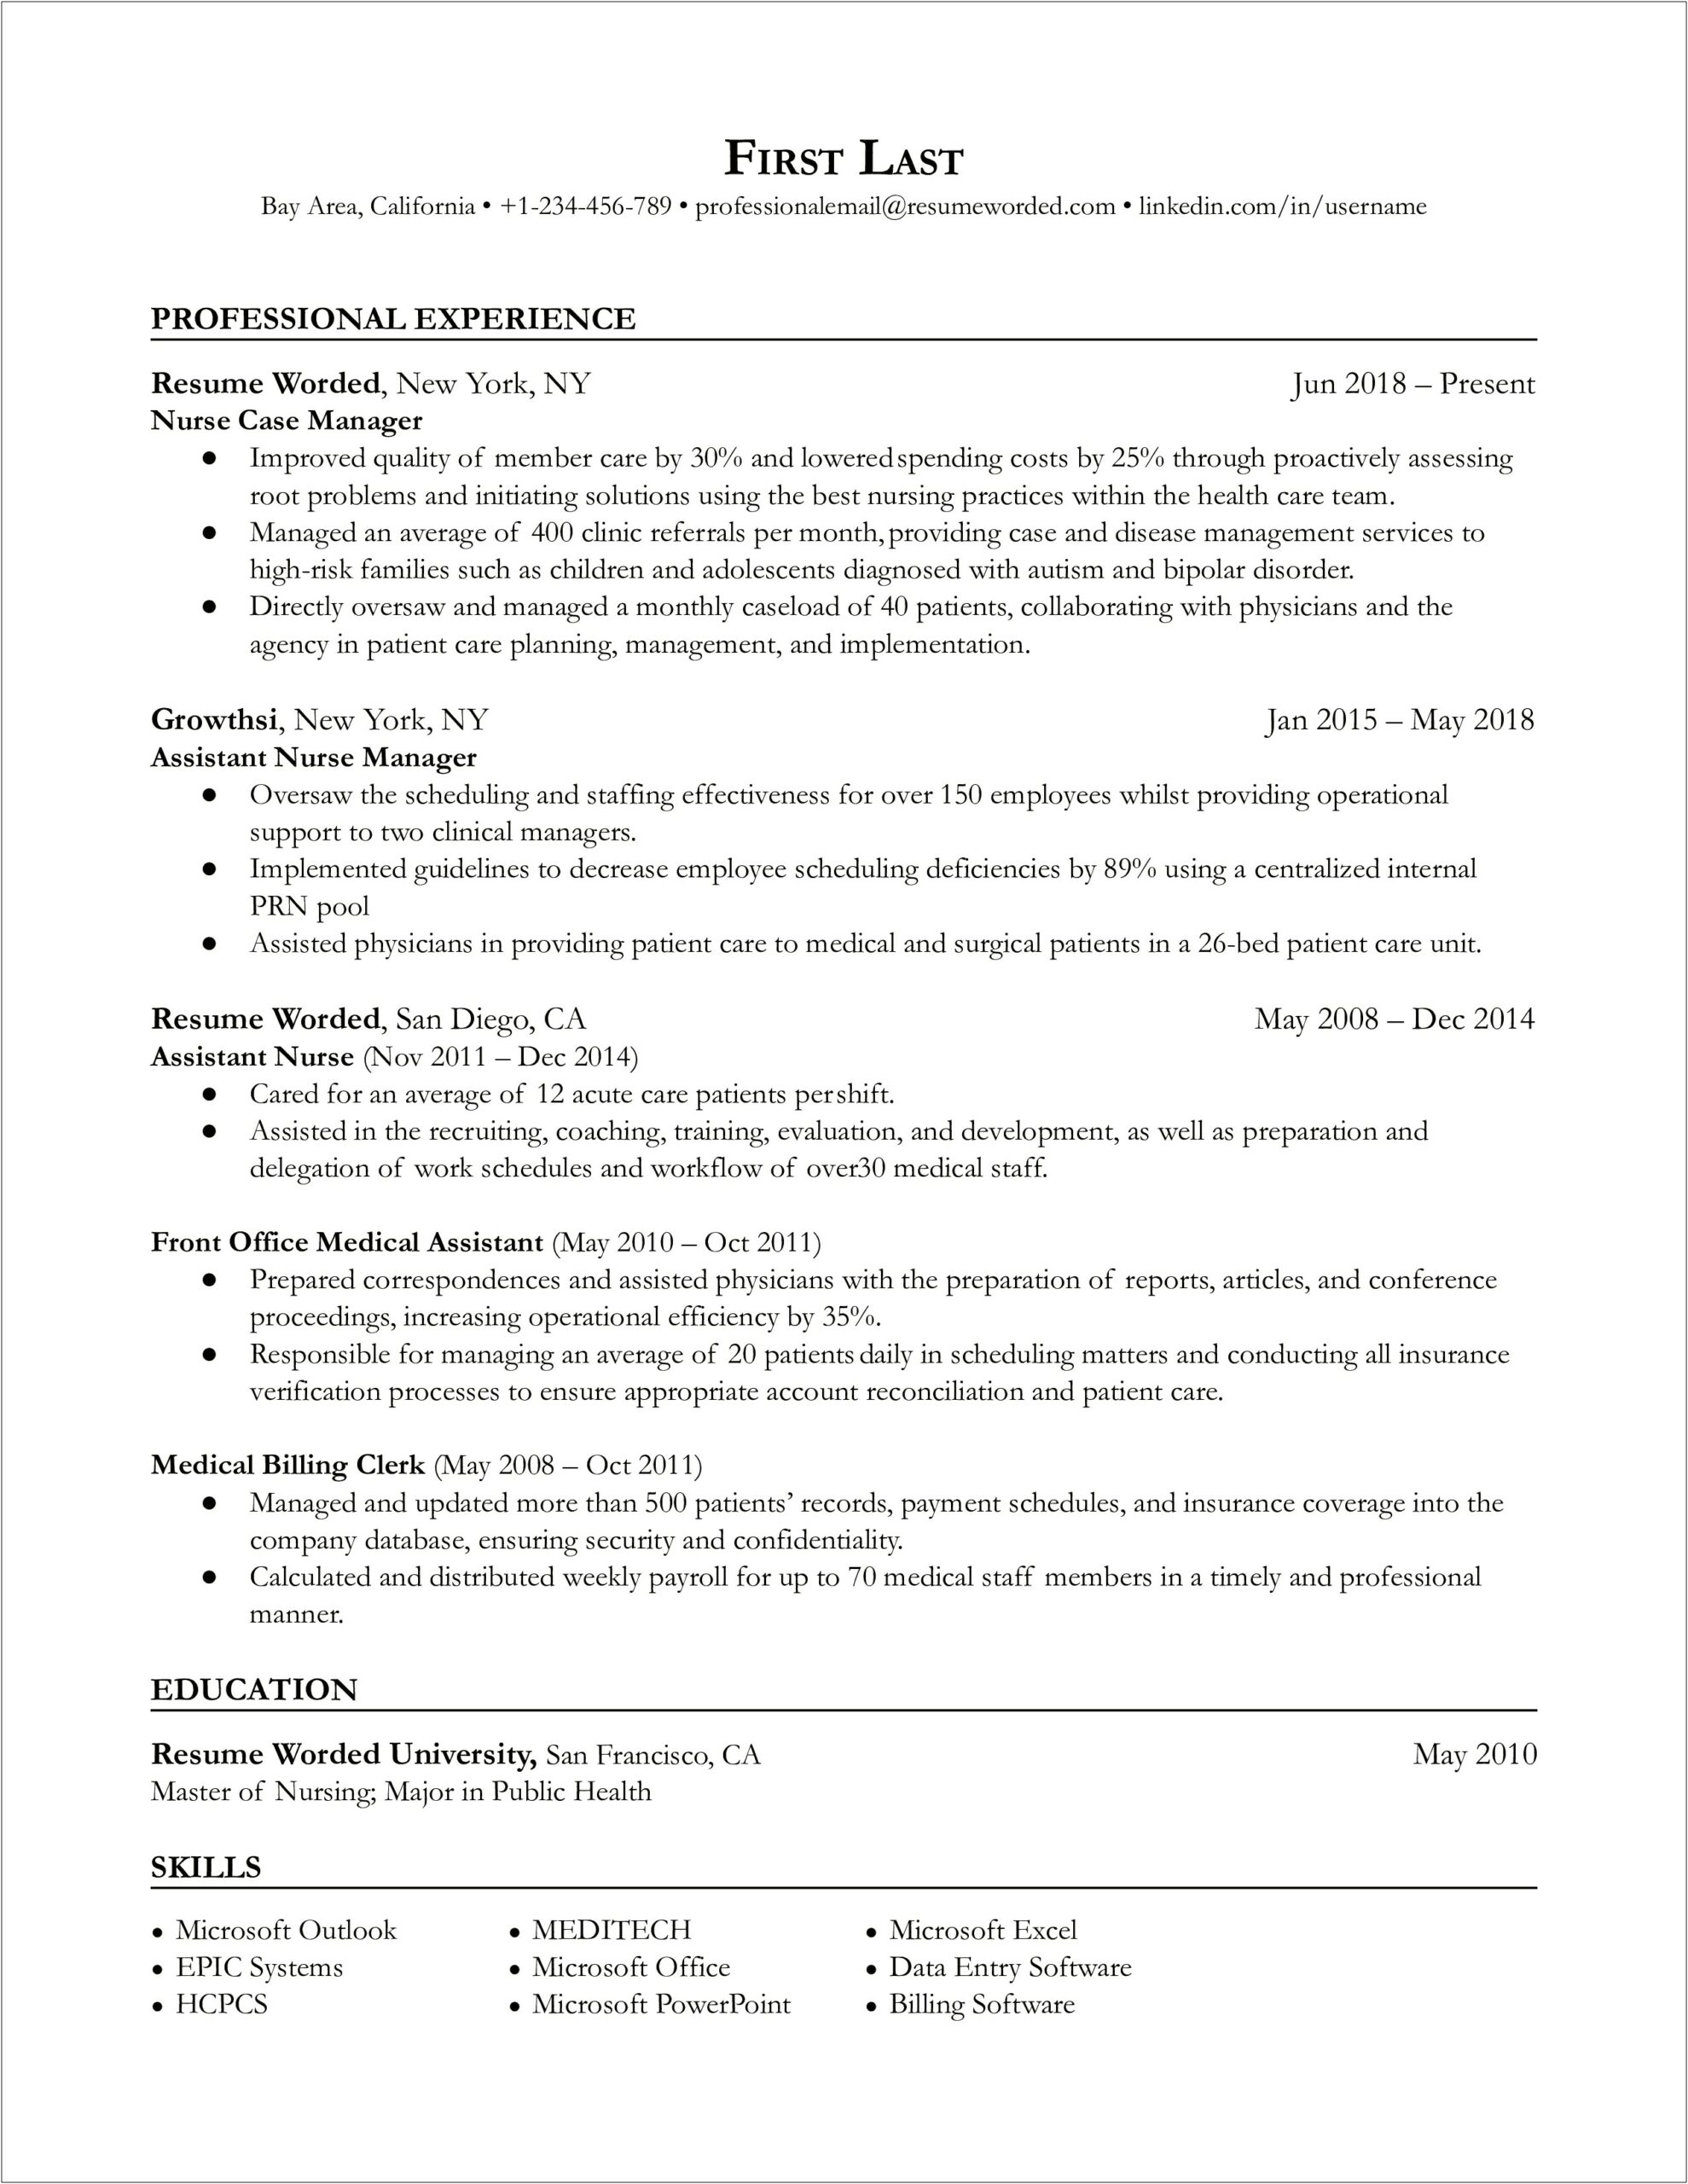 Assistant Nurse Manager Resume Objective